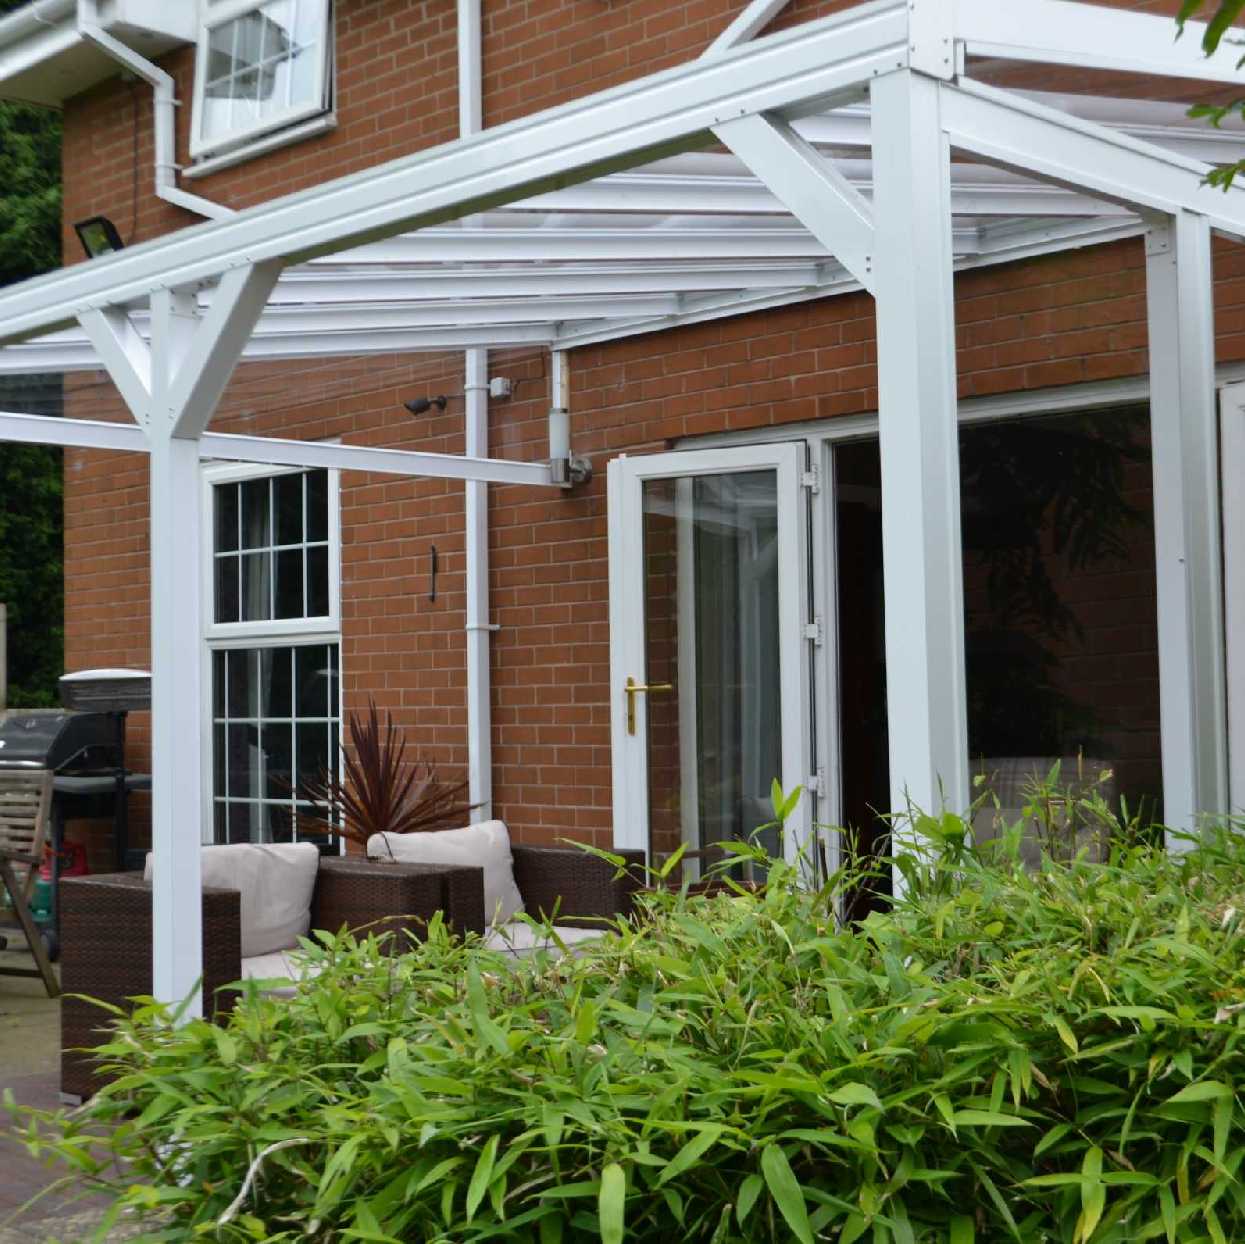 Omega Smart Lean-To Canopy, White with 6mm Glass Clear Plate Polycarbonate Glazing - 9.4m (W) x 4.0m (P), (5) Supporting Posts from Omega Build